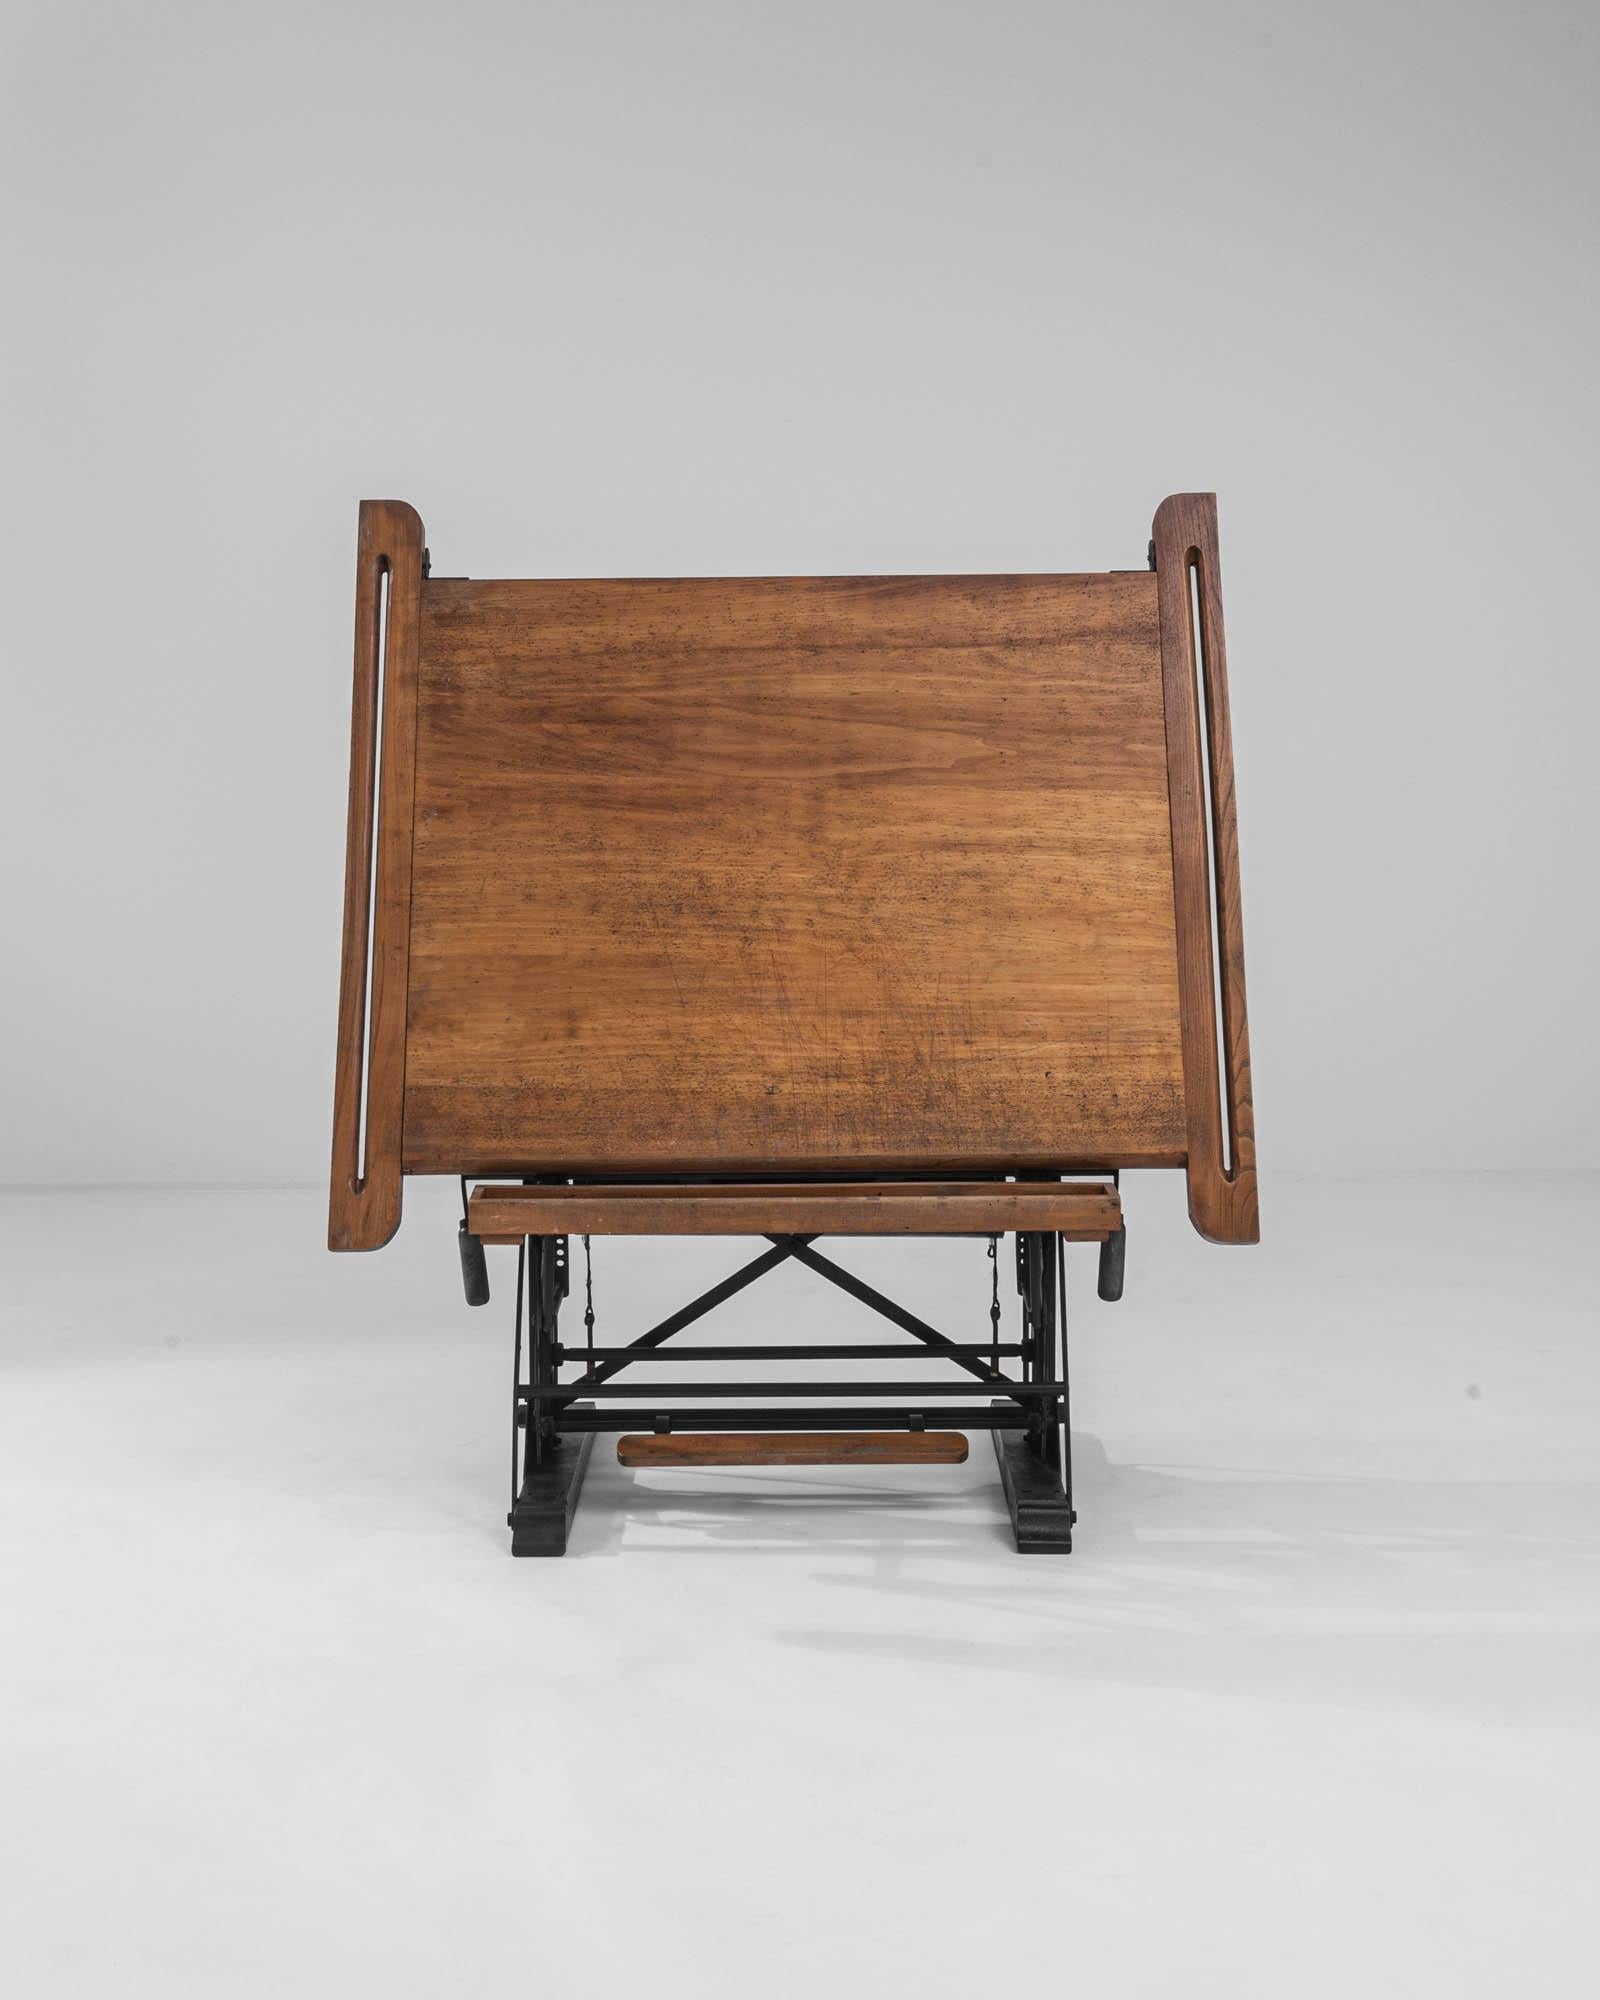 This vintage drawing table is a beautiful example of Industrial elegance. Produced in Brussels in the early 20th century by the Kahn brothers, this piece would have likely originally been used as a draftsman’s table in an architect’s or surveyor’s